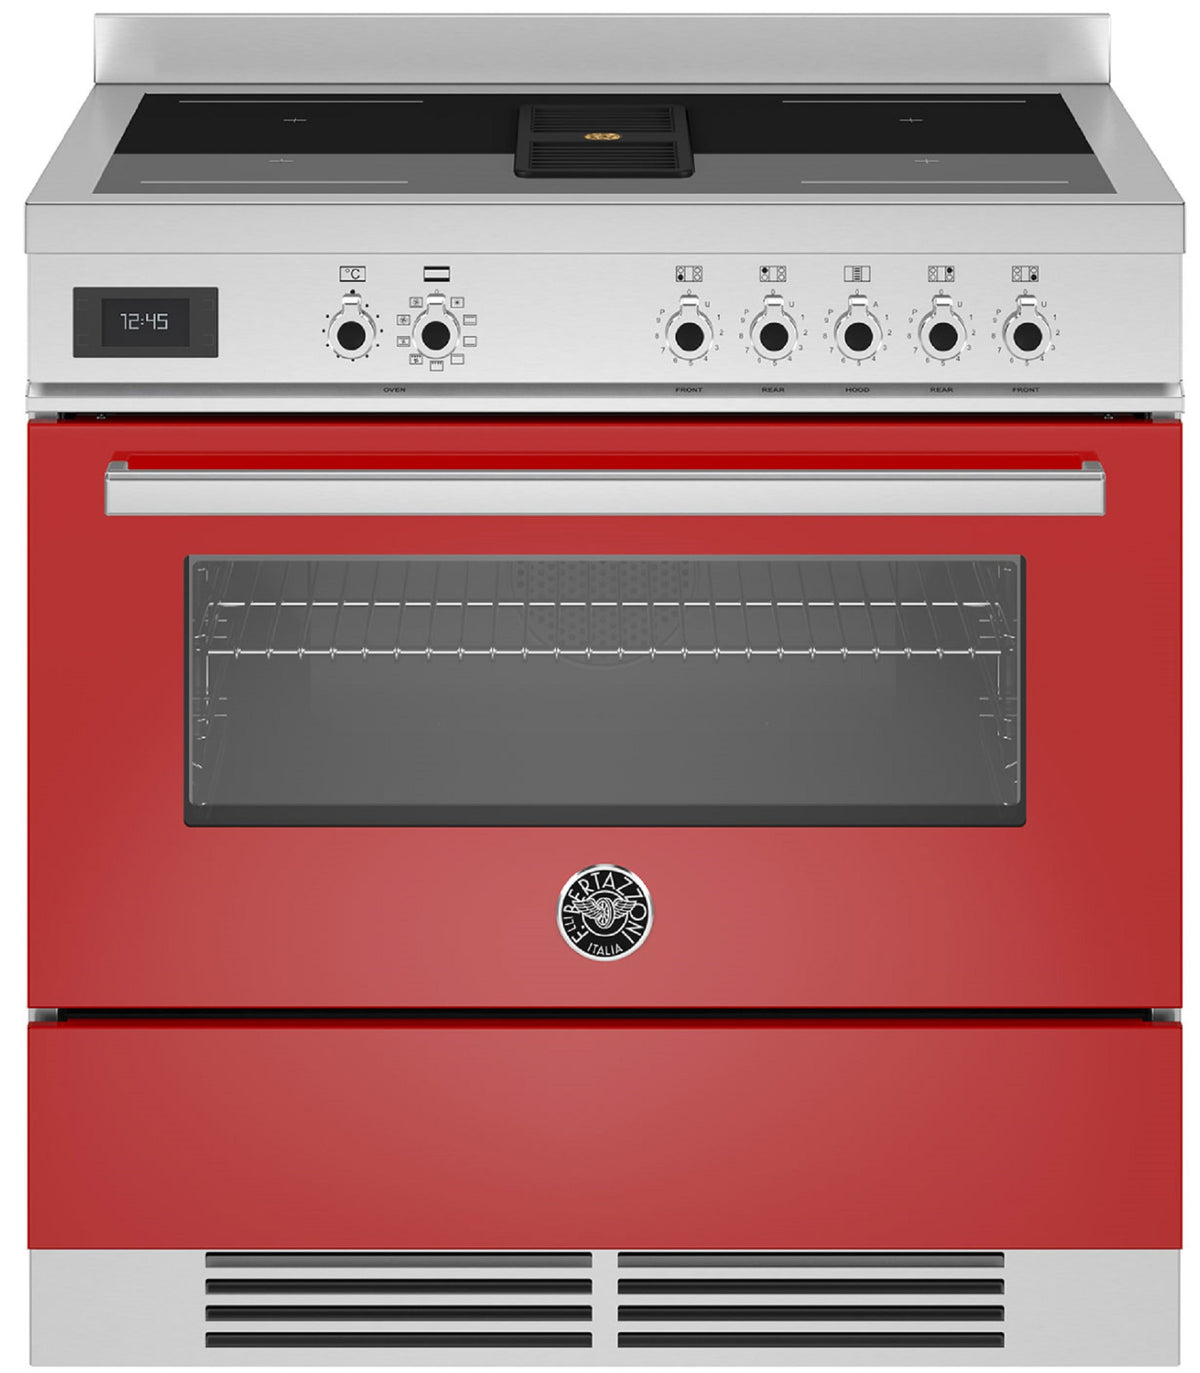 BERTAZZONI PROCH94I1EROT 90cm Electric Oven 5 Zone Induction Hob with in-built Extractor Range Cooker in Red